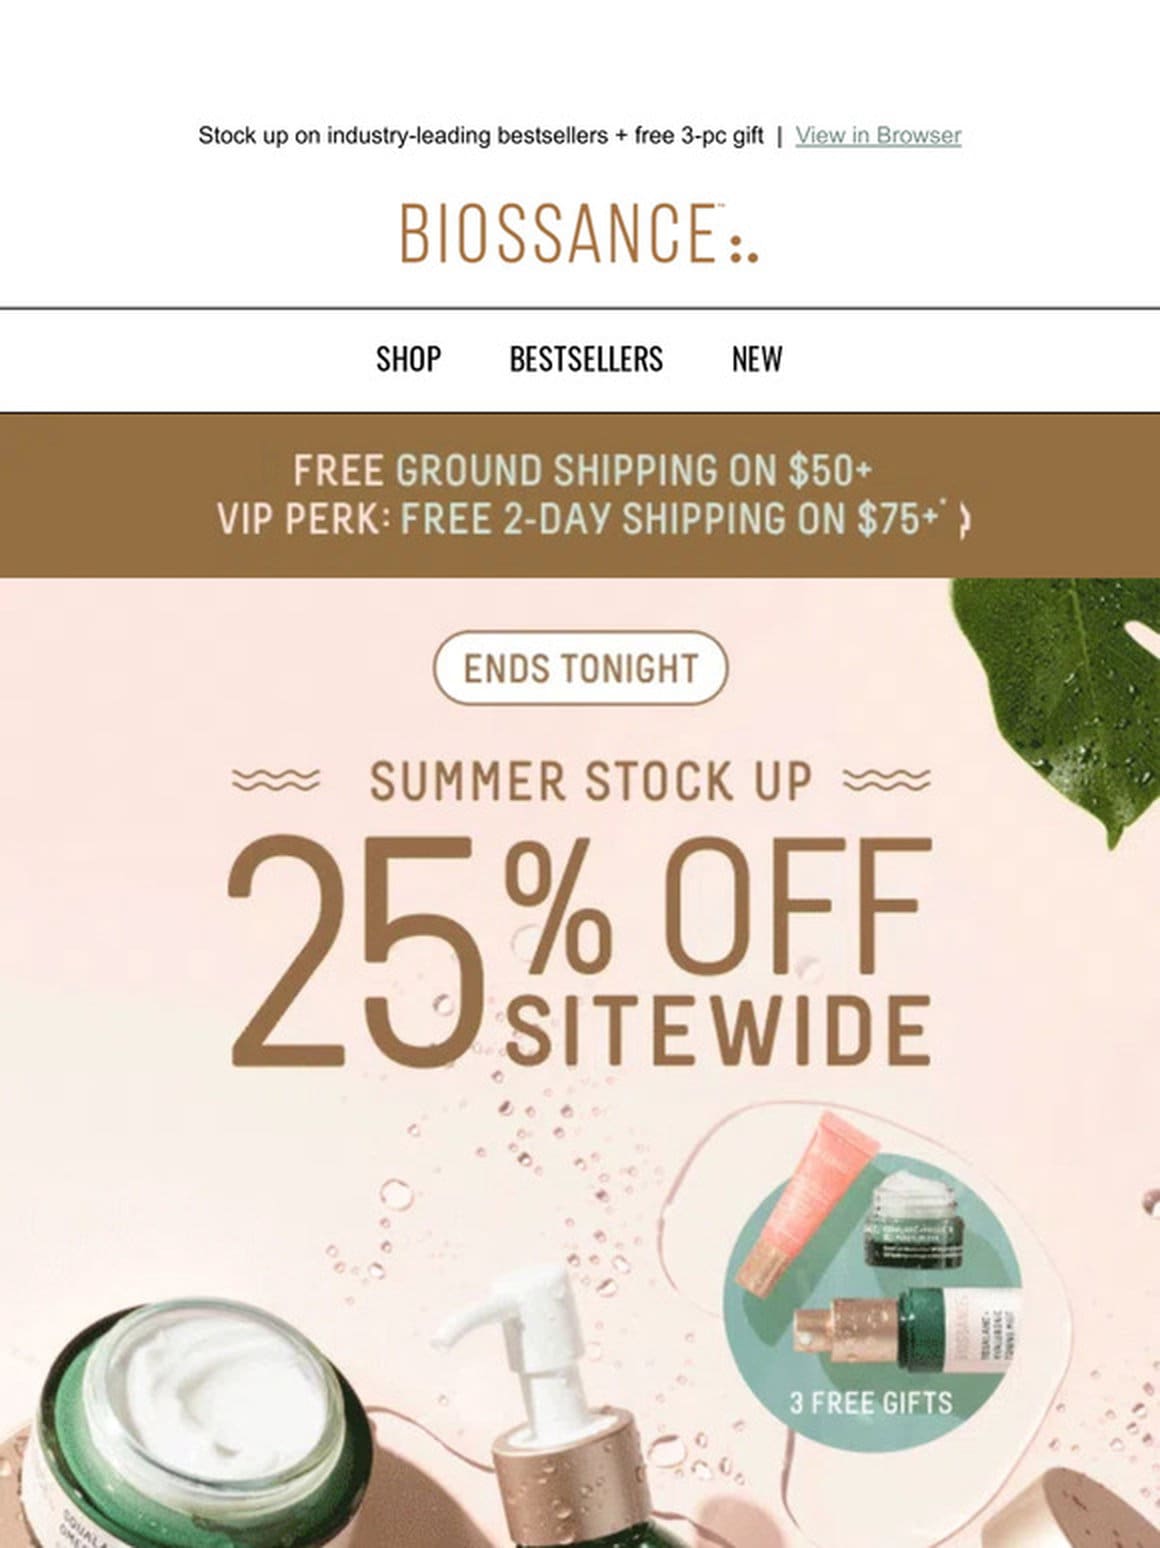 25% off sitewide ends TONIGHT